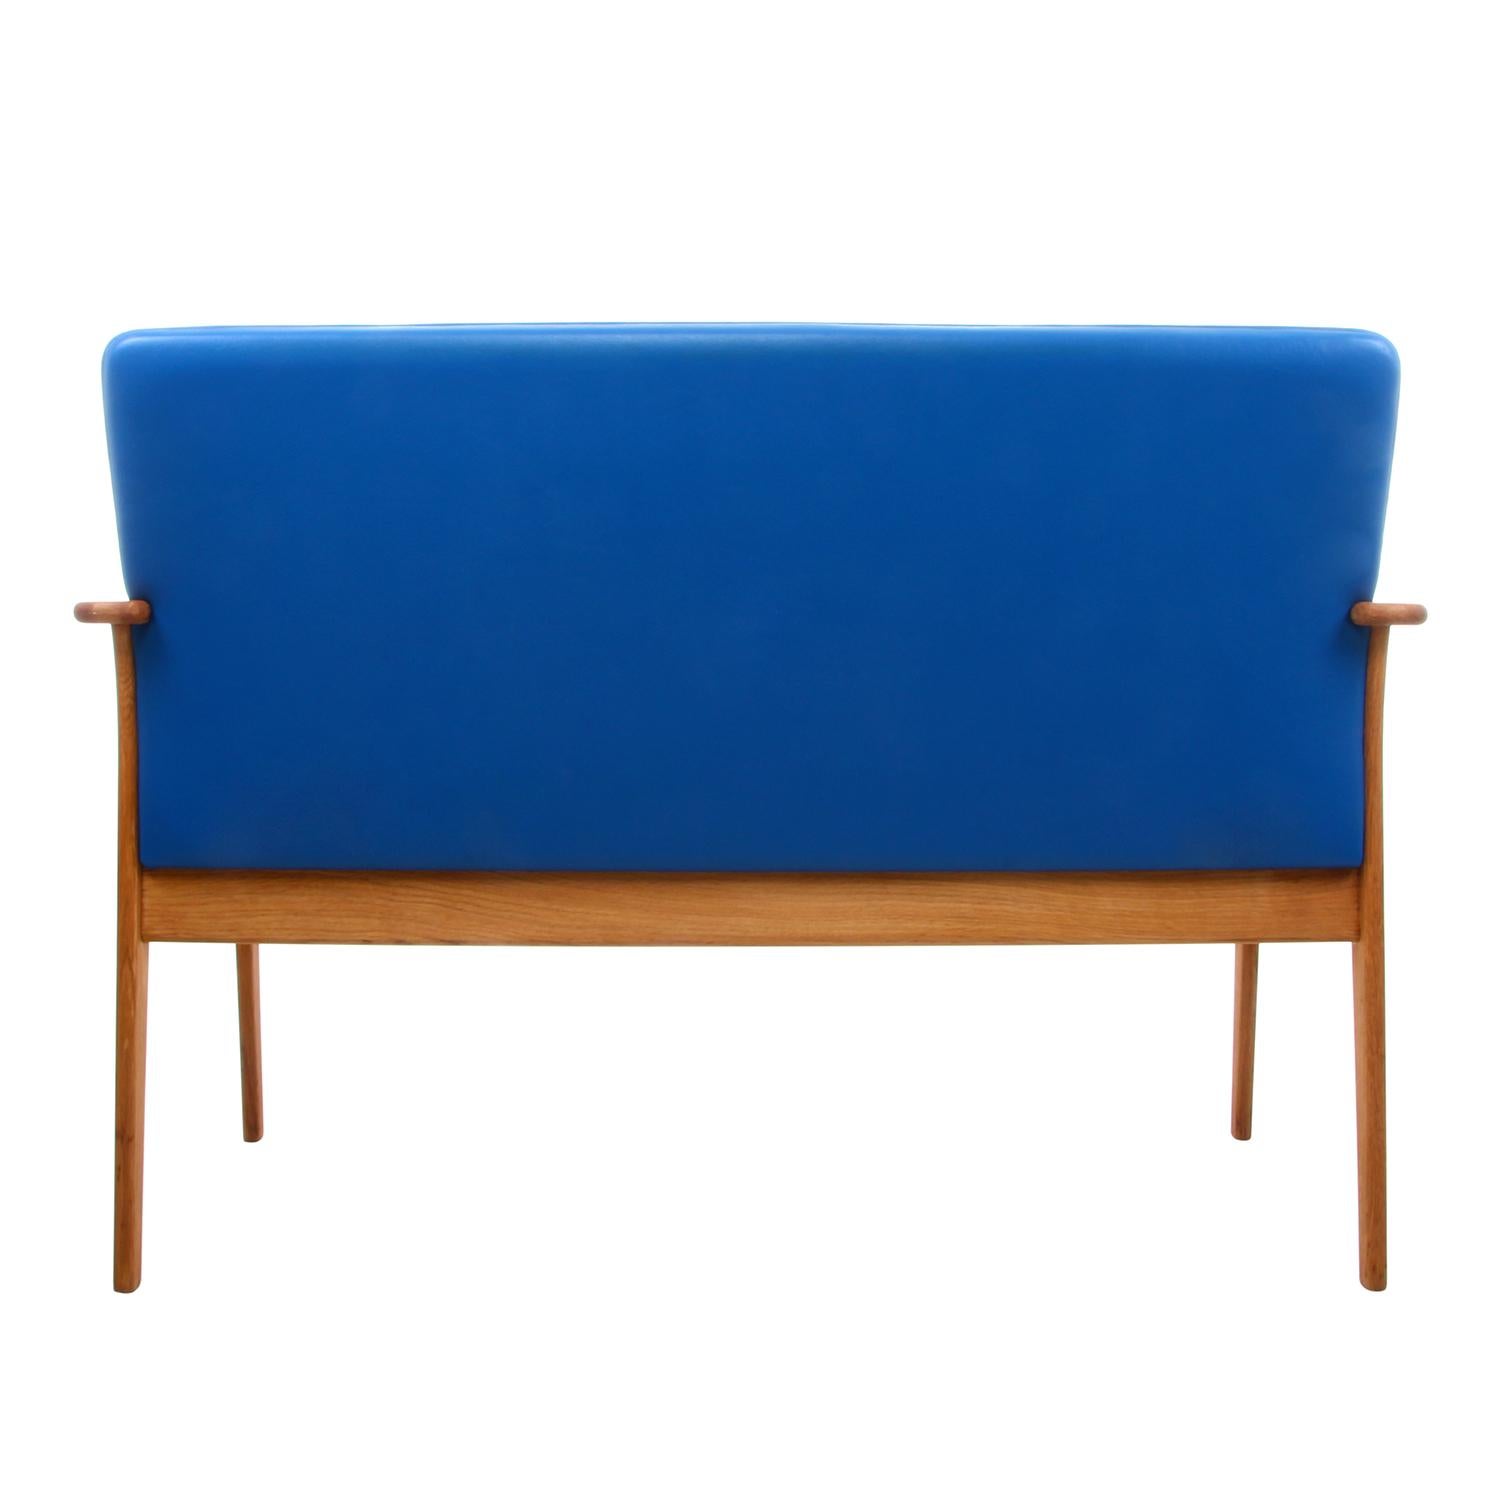 Danish Two-Seat Sofa by Erik Buch 1970s Oil-Treated Oak Couch with Clear Blue Upholster